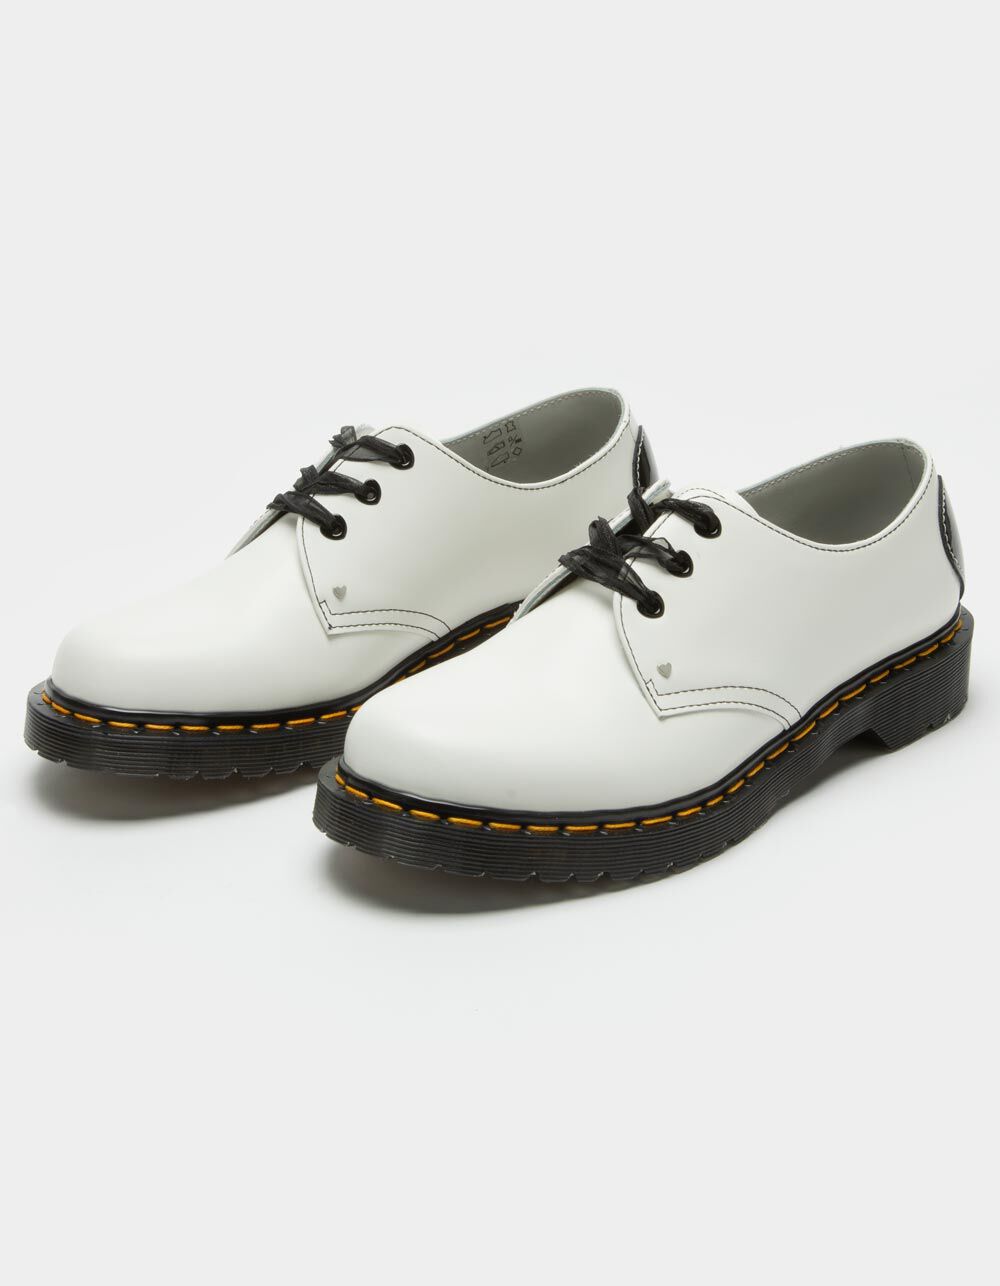 DR. MARTENS 1461 Hearts Smooth & Patent Leather Womens Oxford Shoes ...